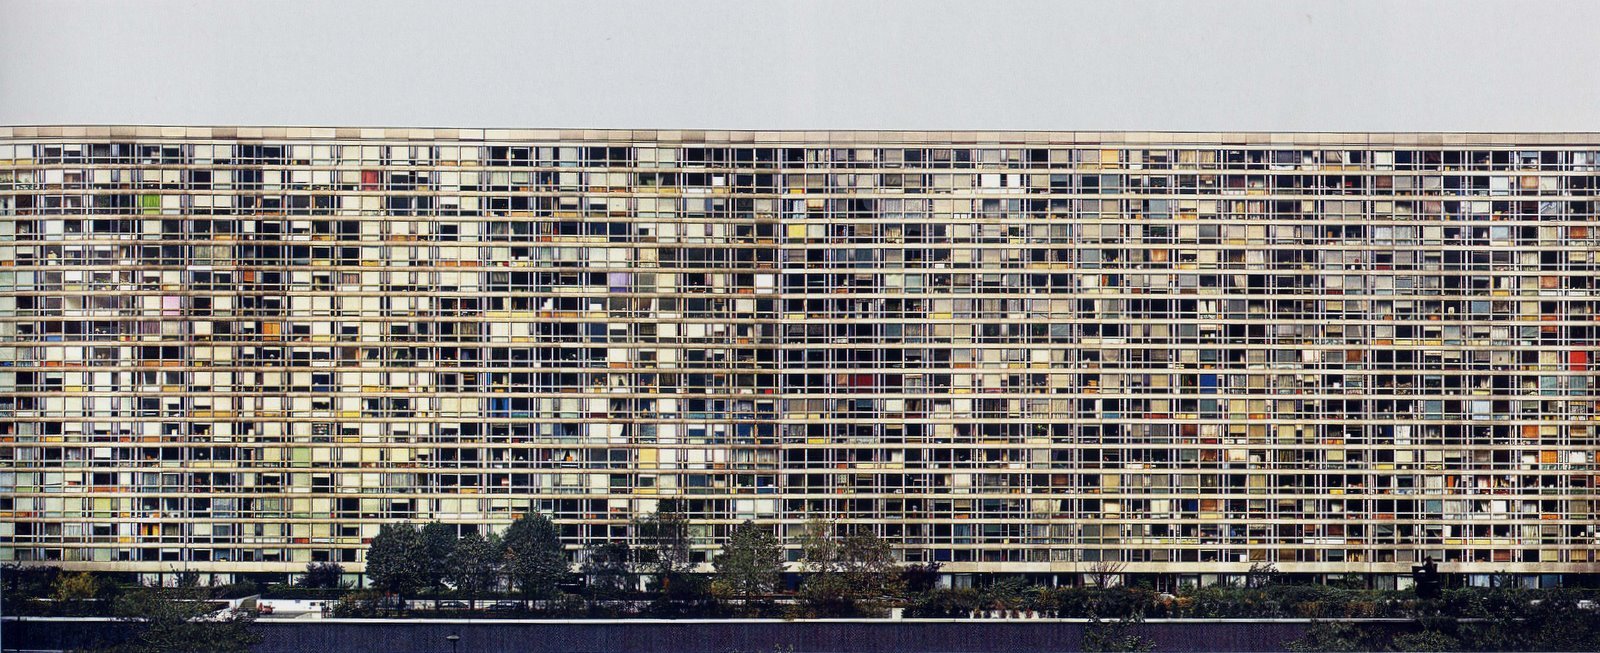 Andreas-Gursky-22